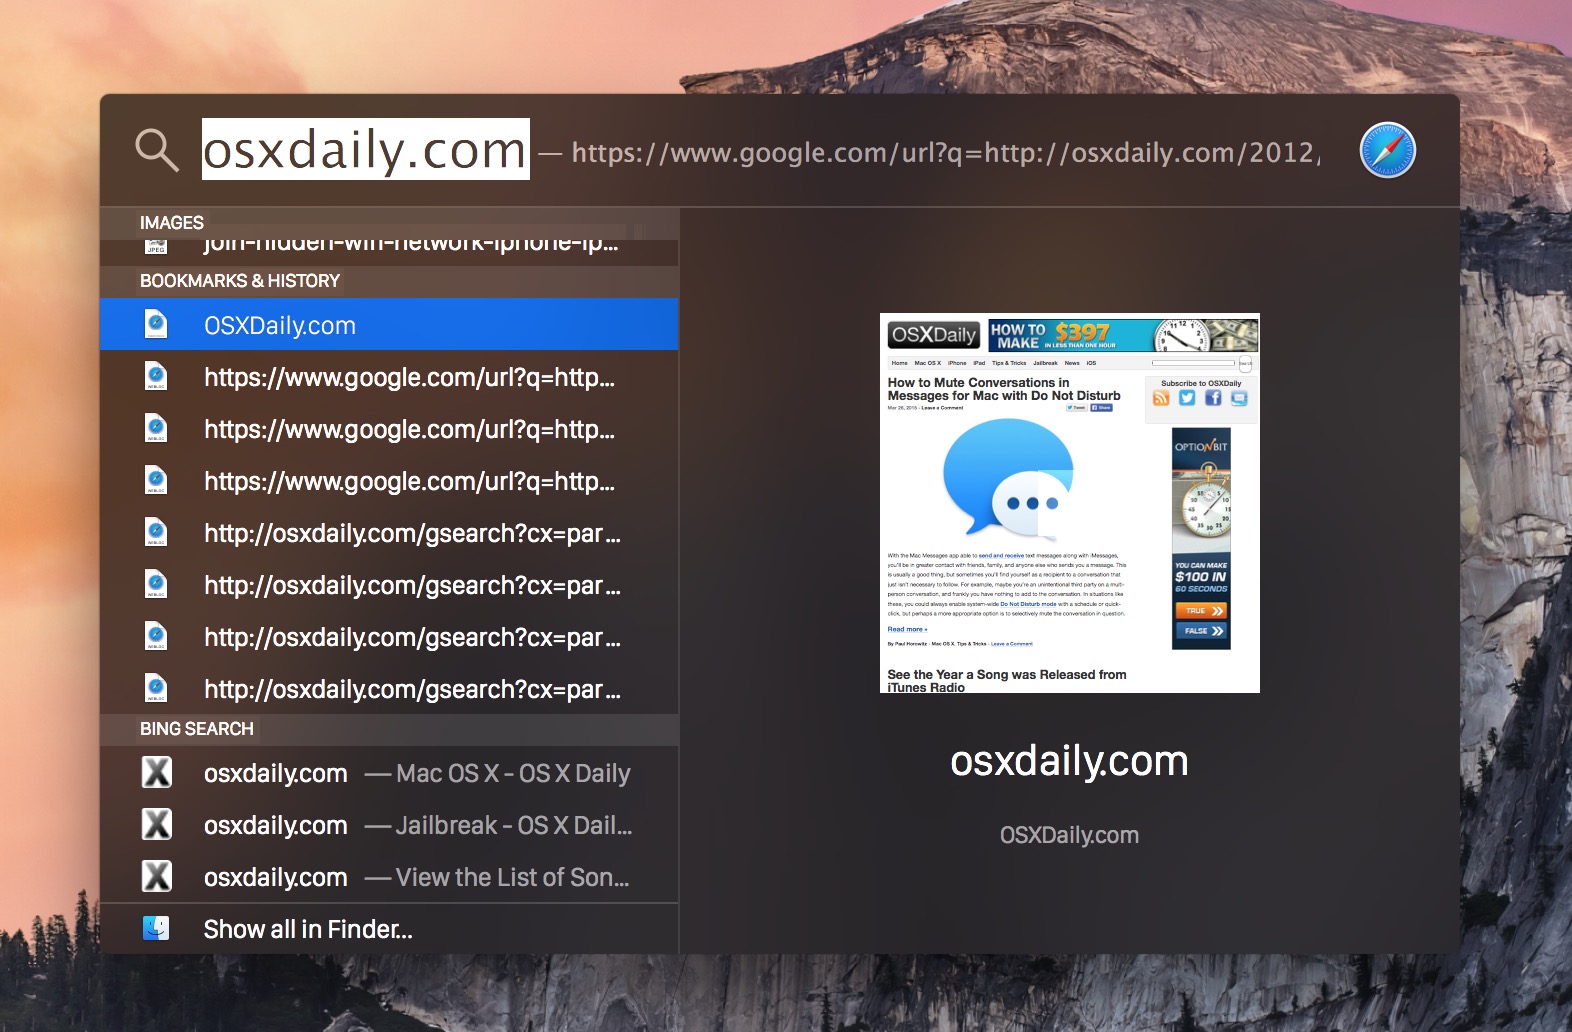 Live Preview of a Website in Spotlight for Mac OS X